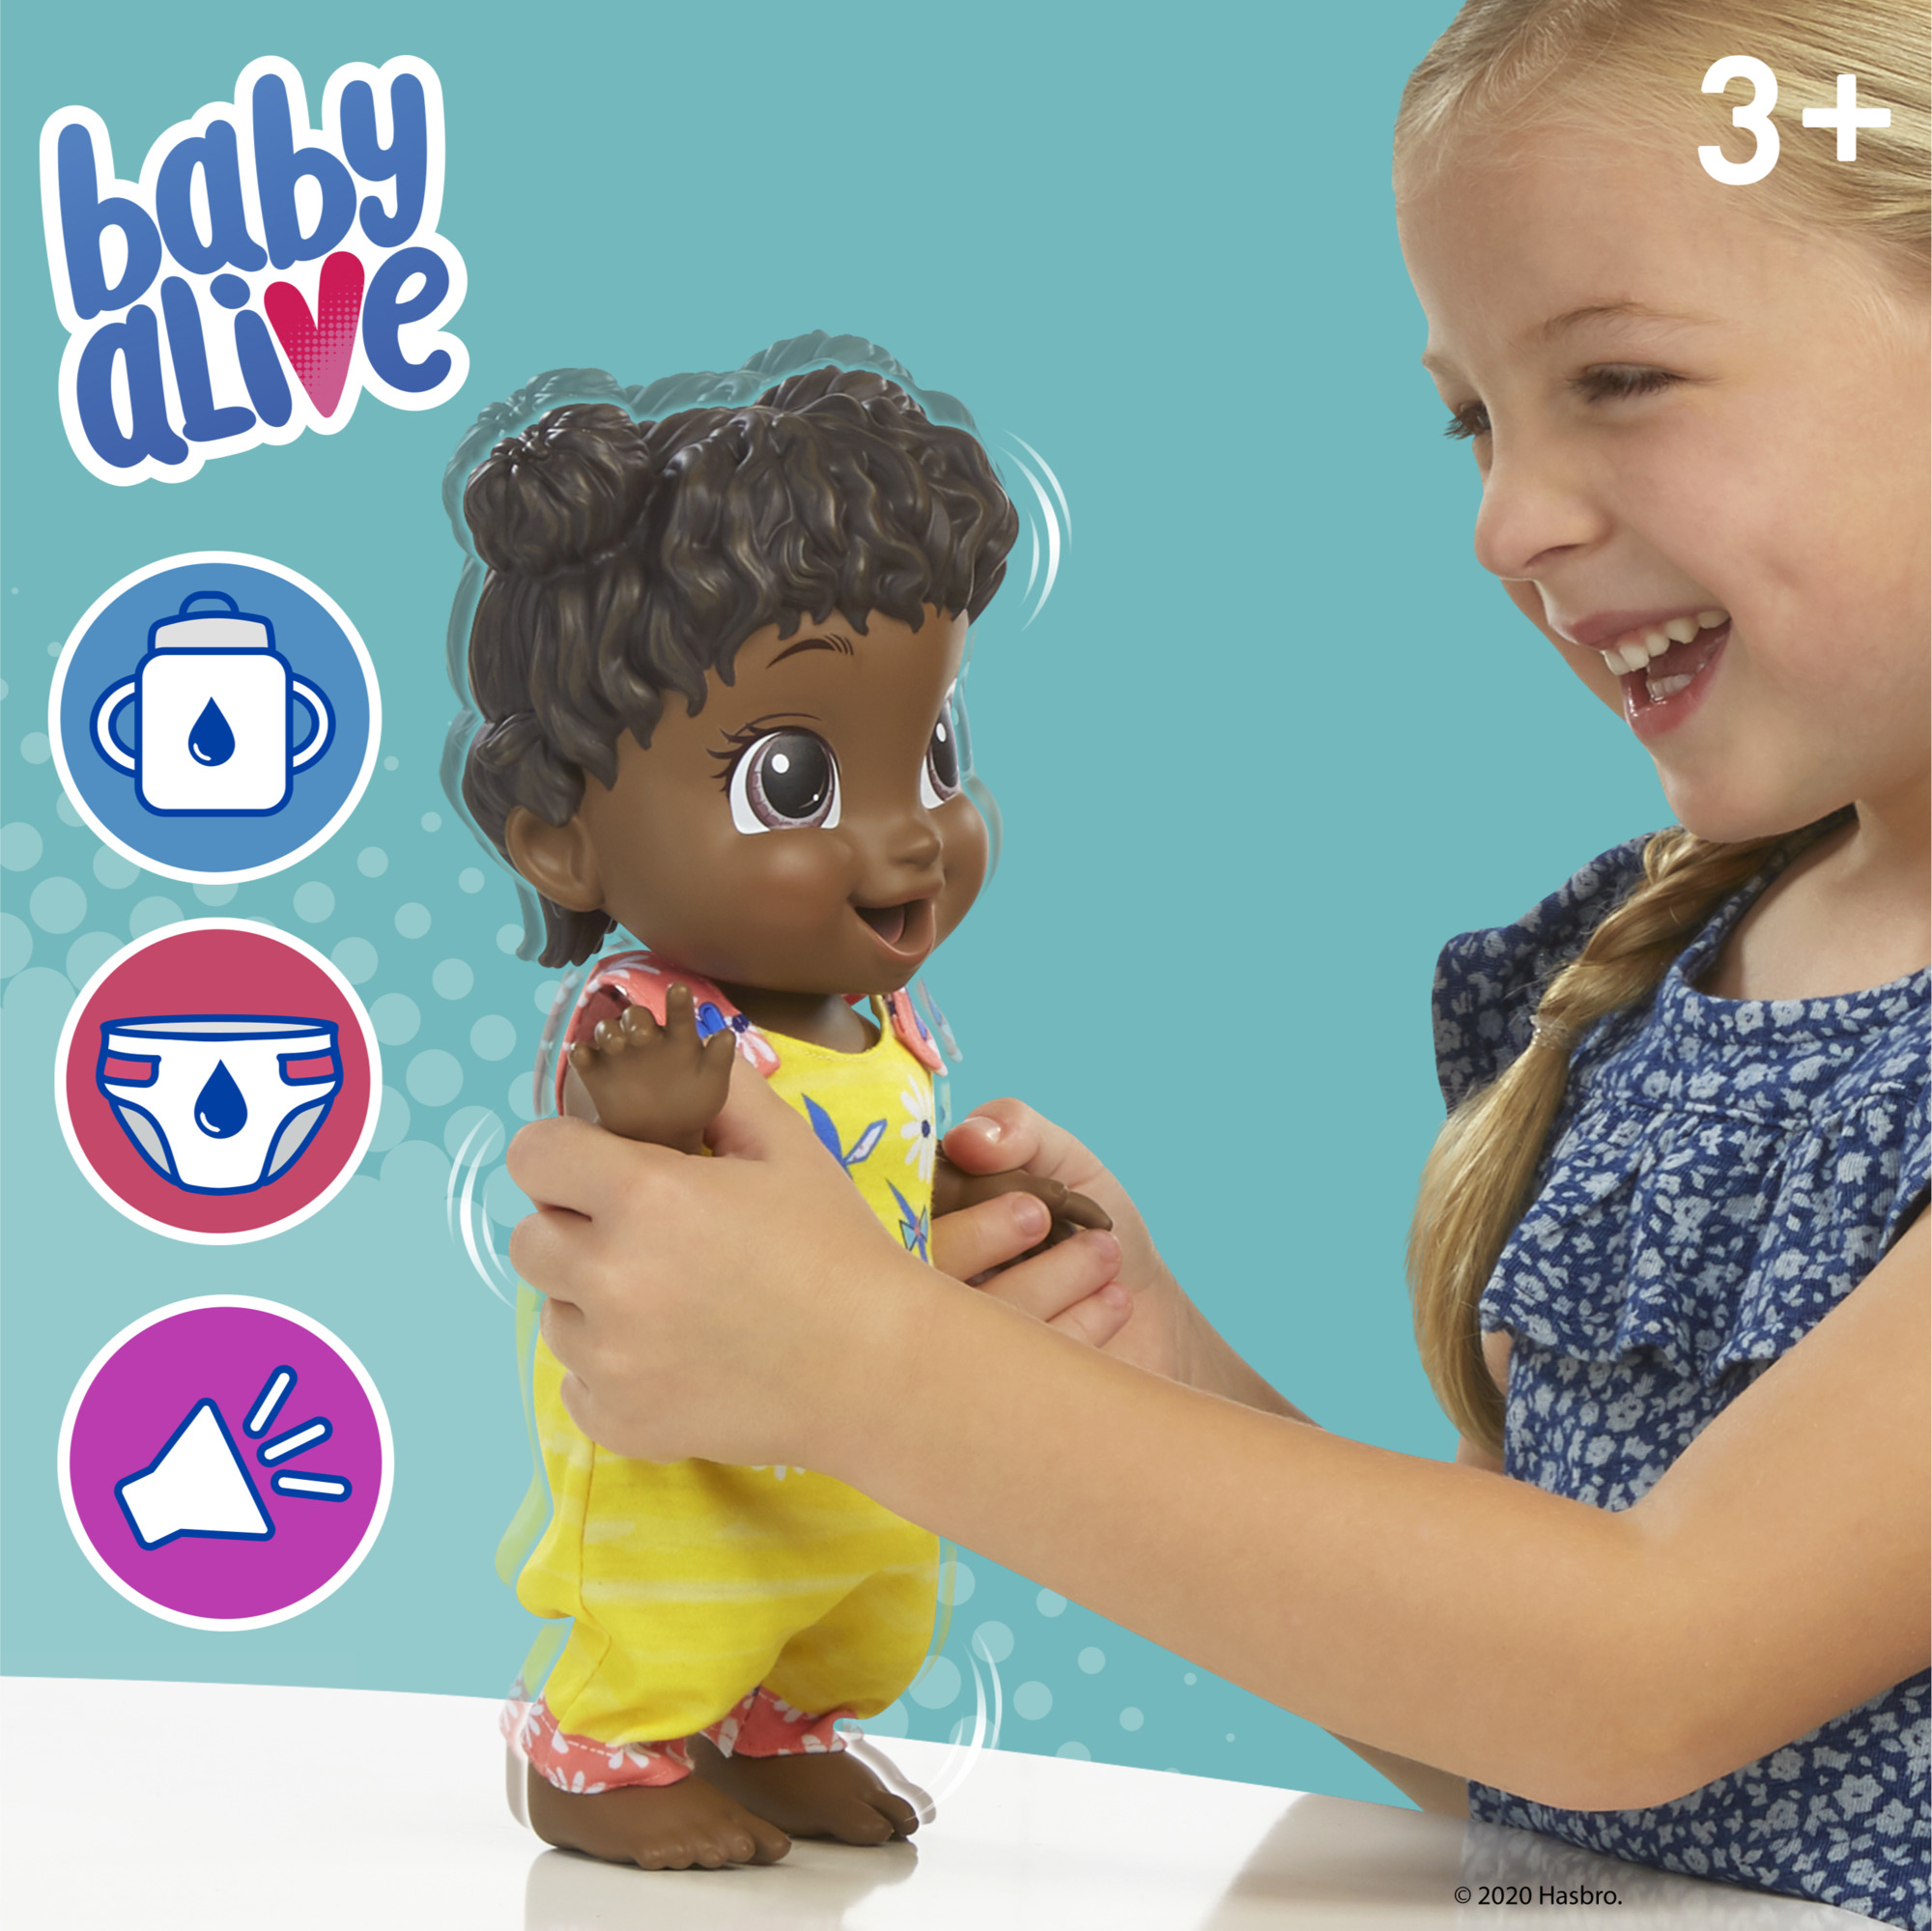 Baby Alive Baby Gotta Bounce Doll, Kangaroo, Bounces with 25+ SFX - image 5 of 7